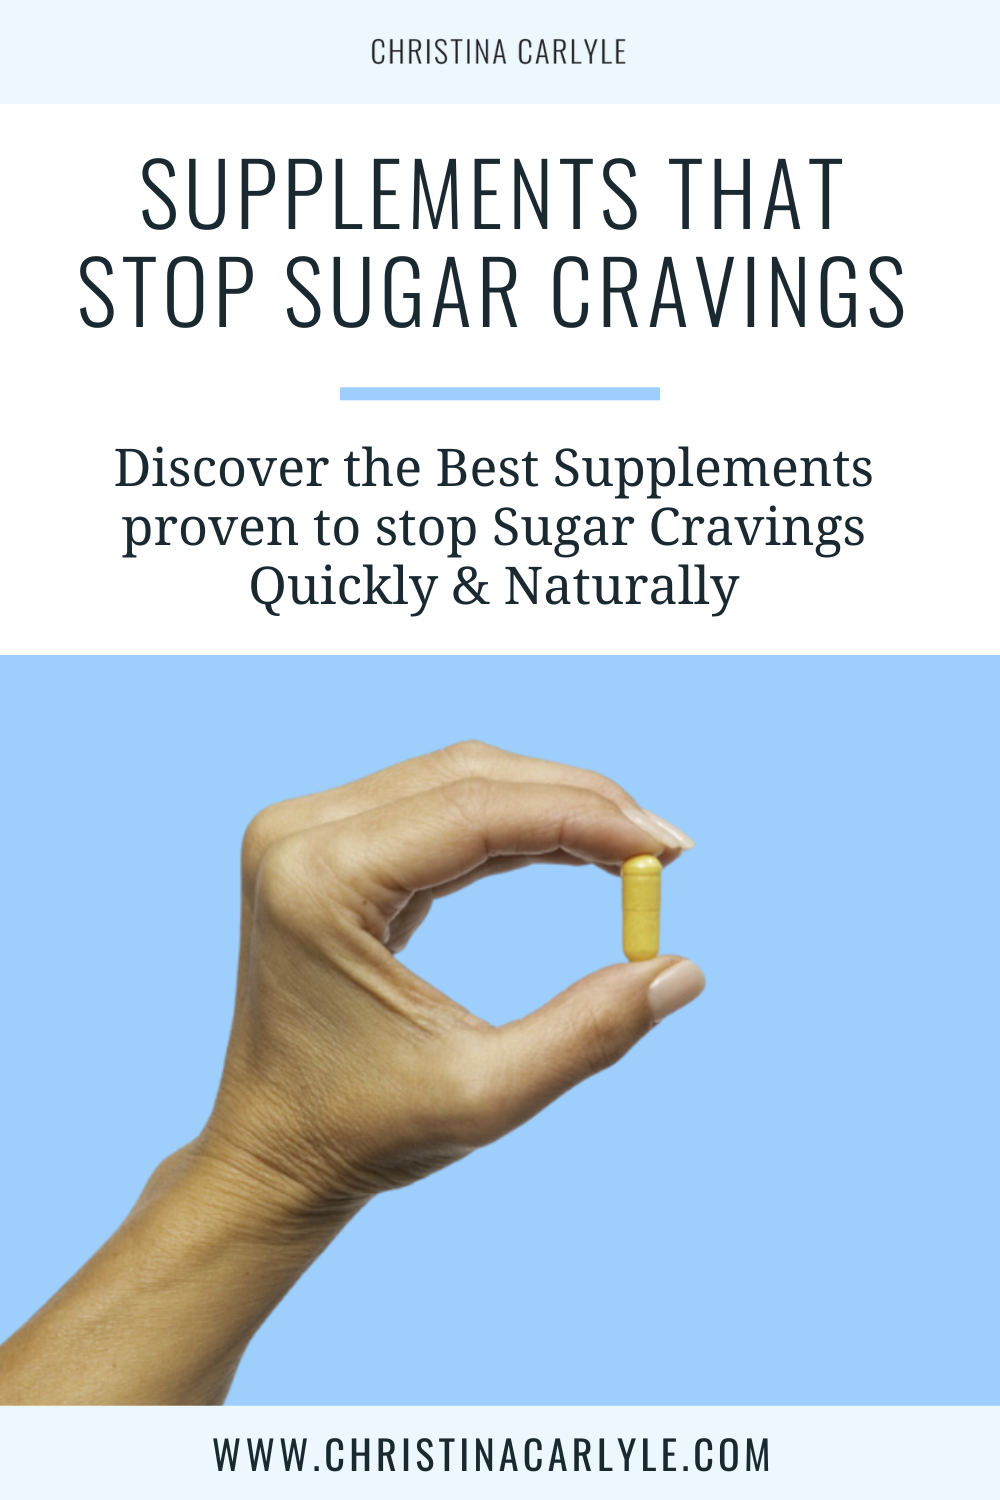 text that says Supplements that Stop Sugar Cravings and a hand holding a supplement up against a blue background